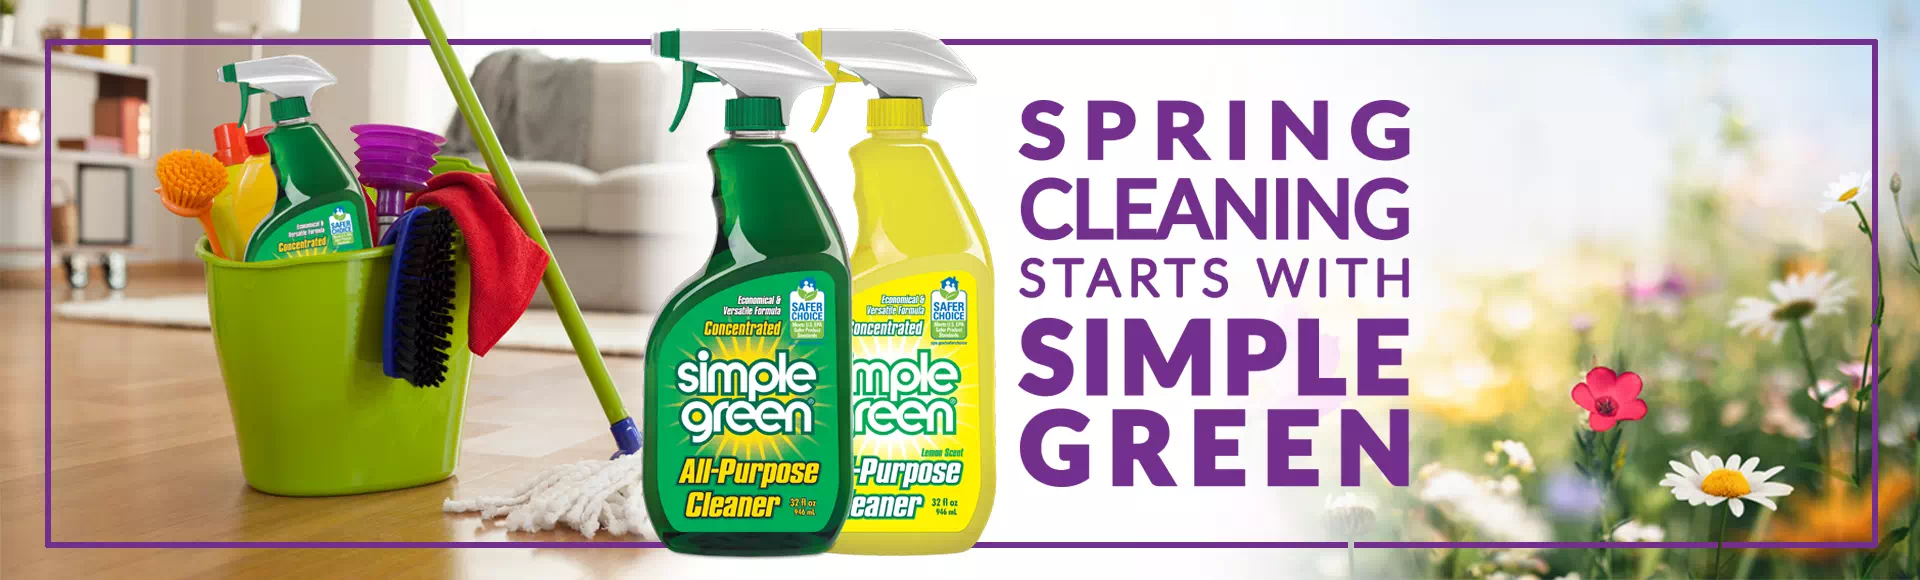 Spring Cleaning Starts With Simple Green